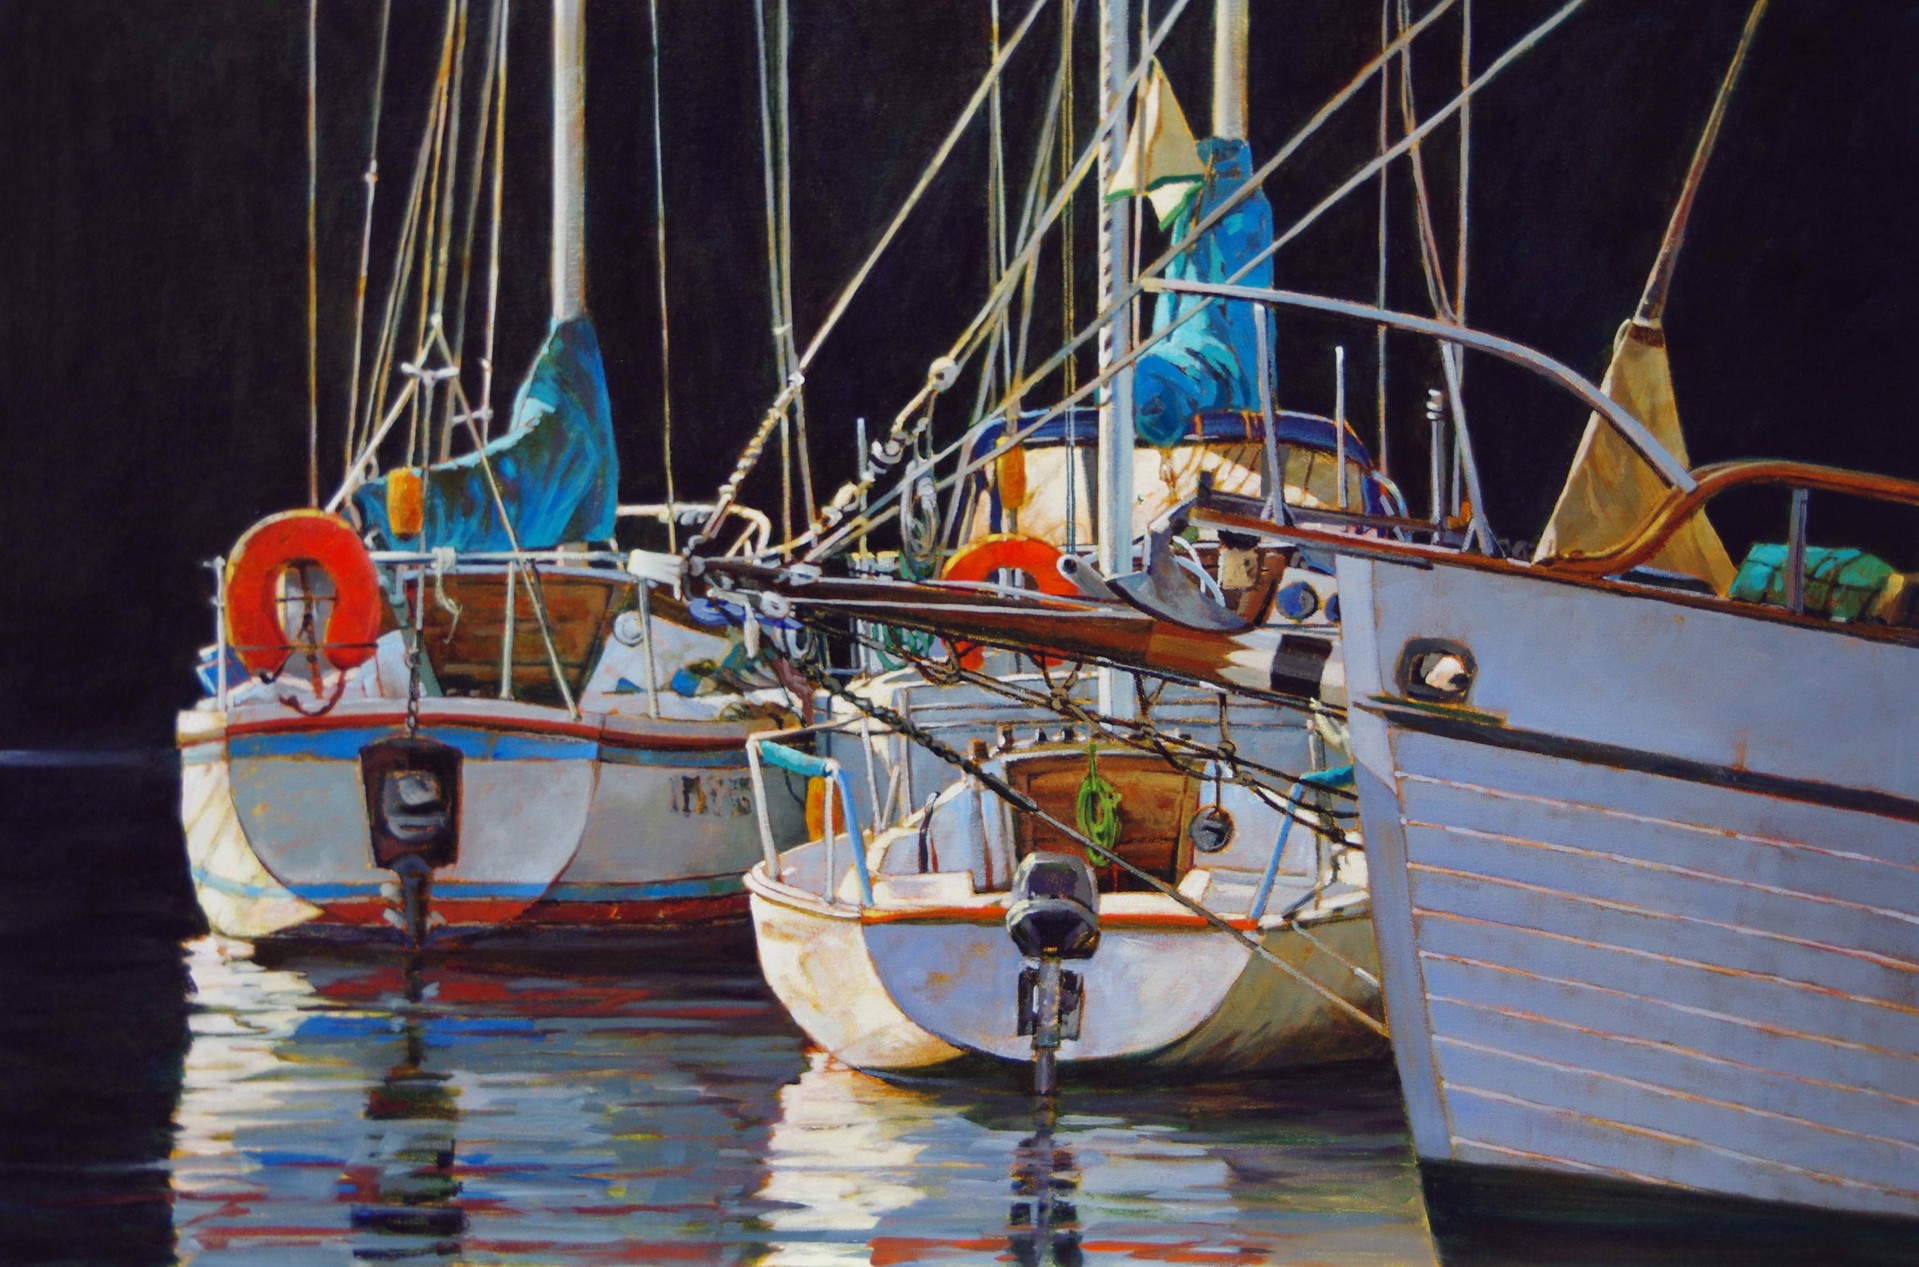 Boats at Dusk by SUSIE CIPOLLA